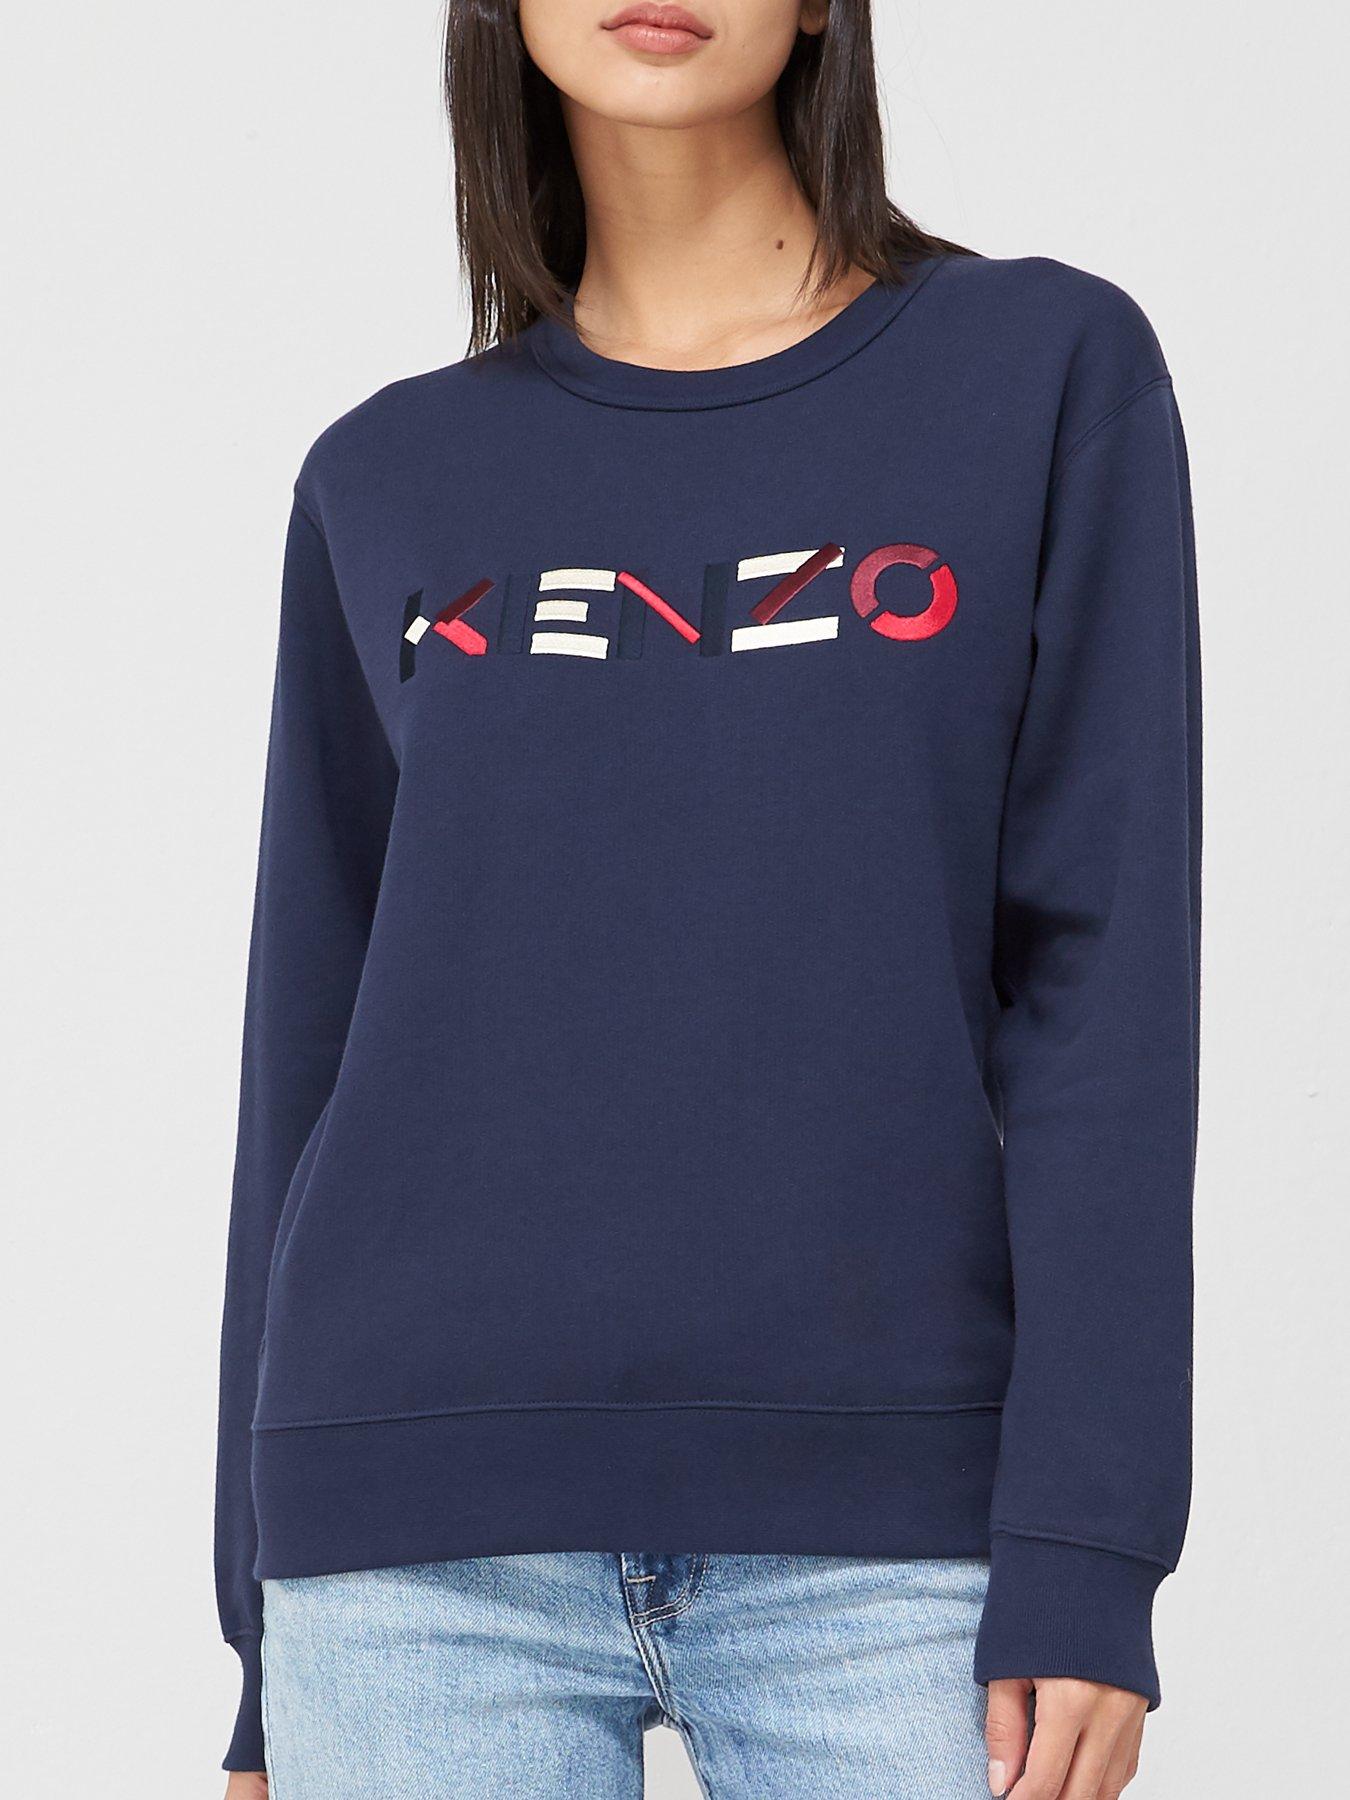 black and silver kenzo jumper